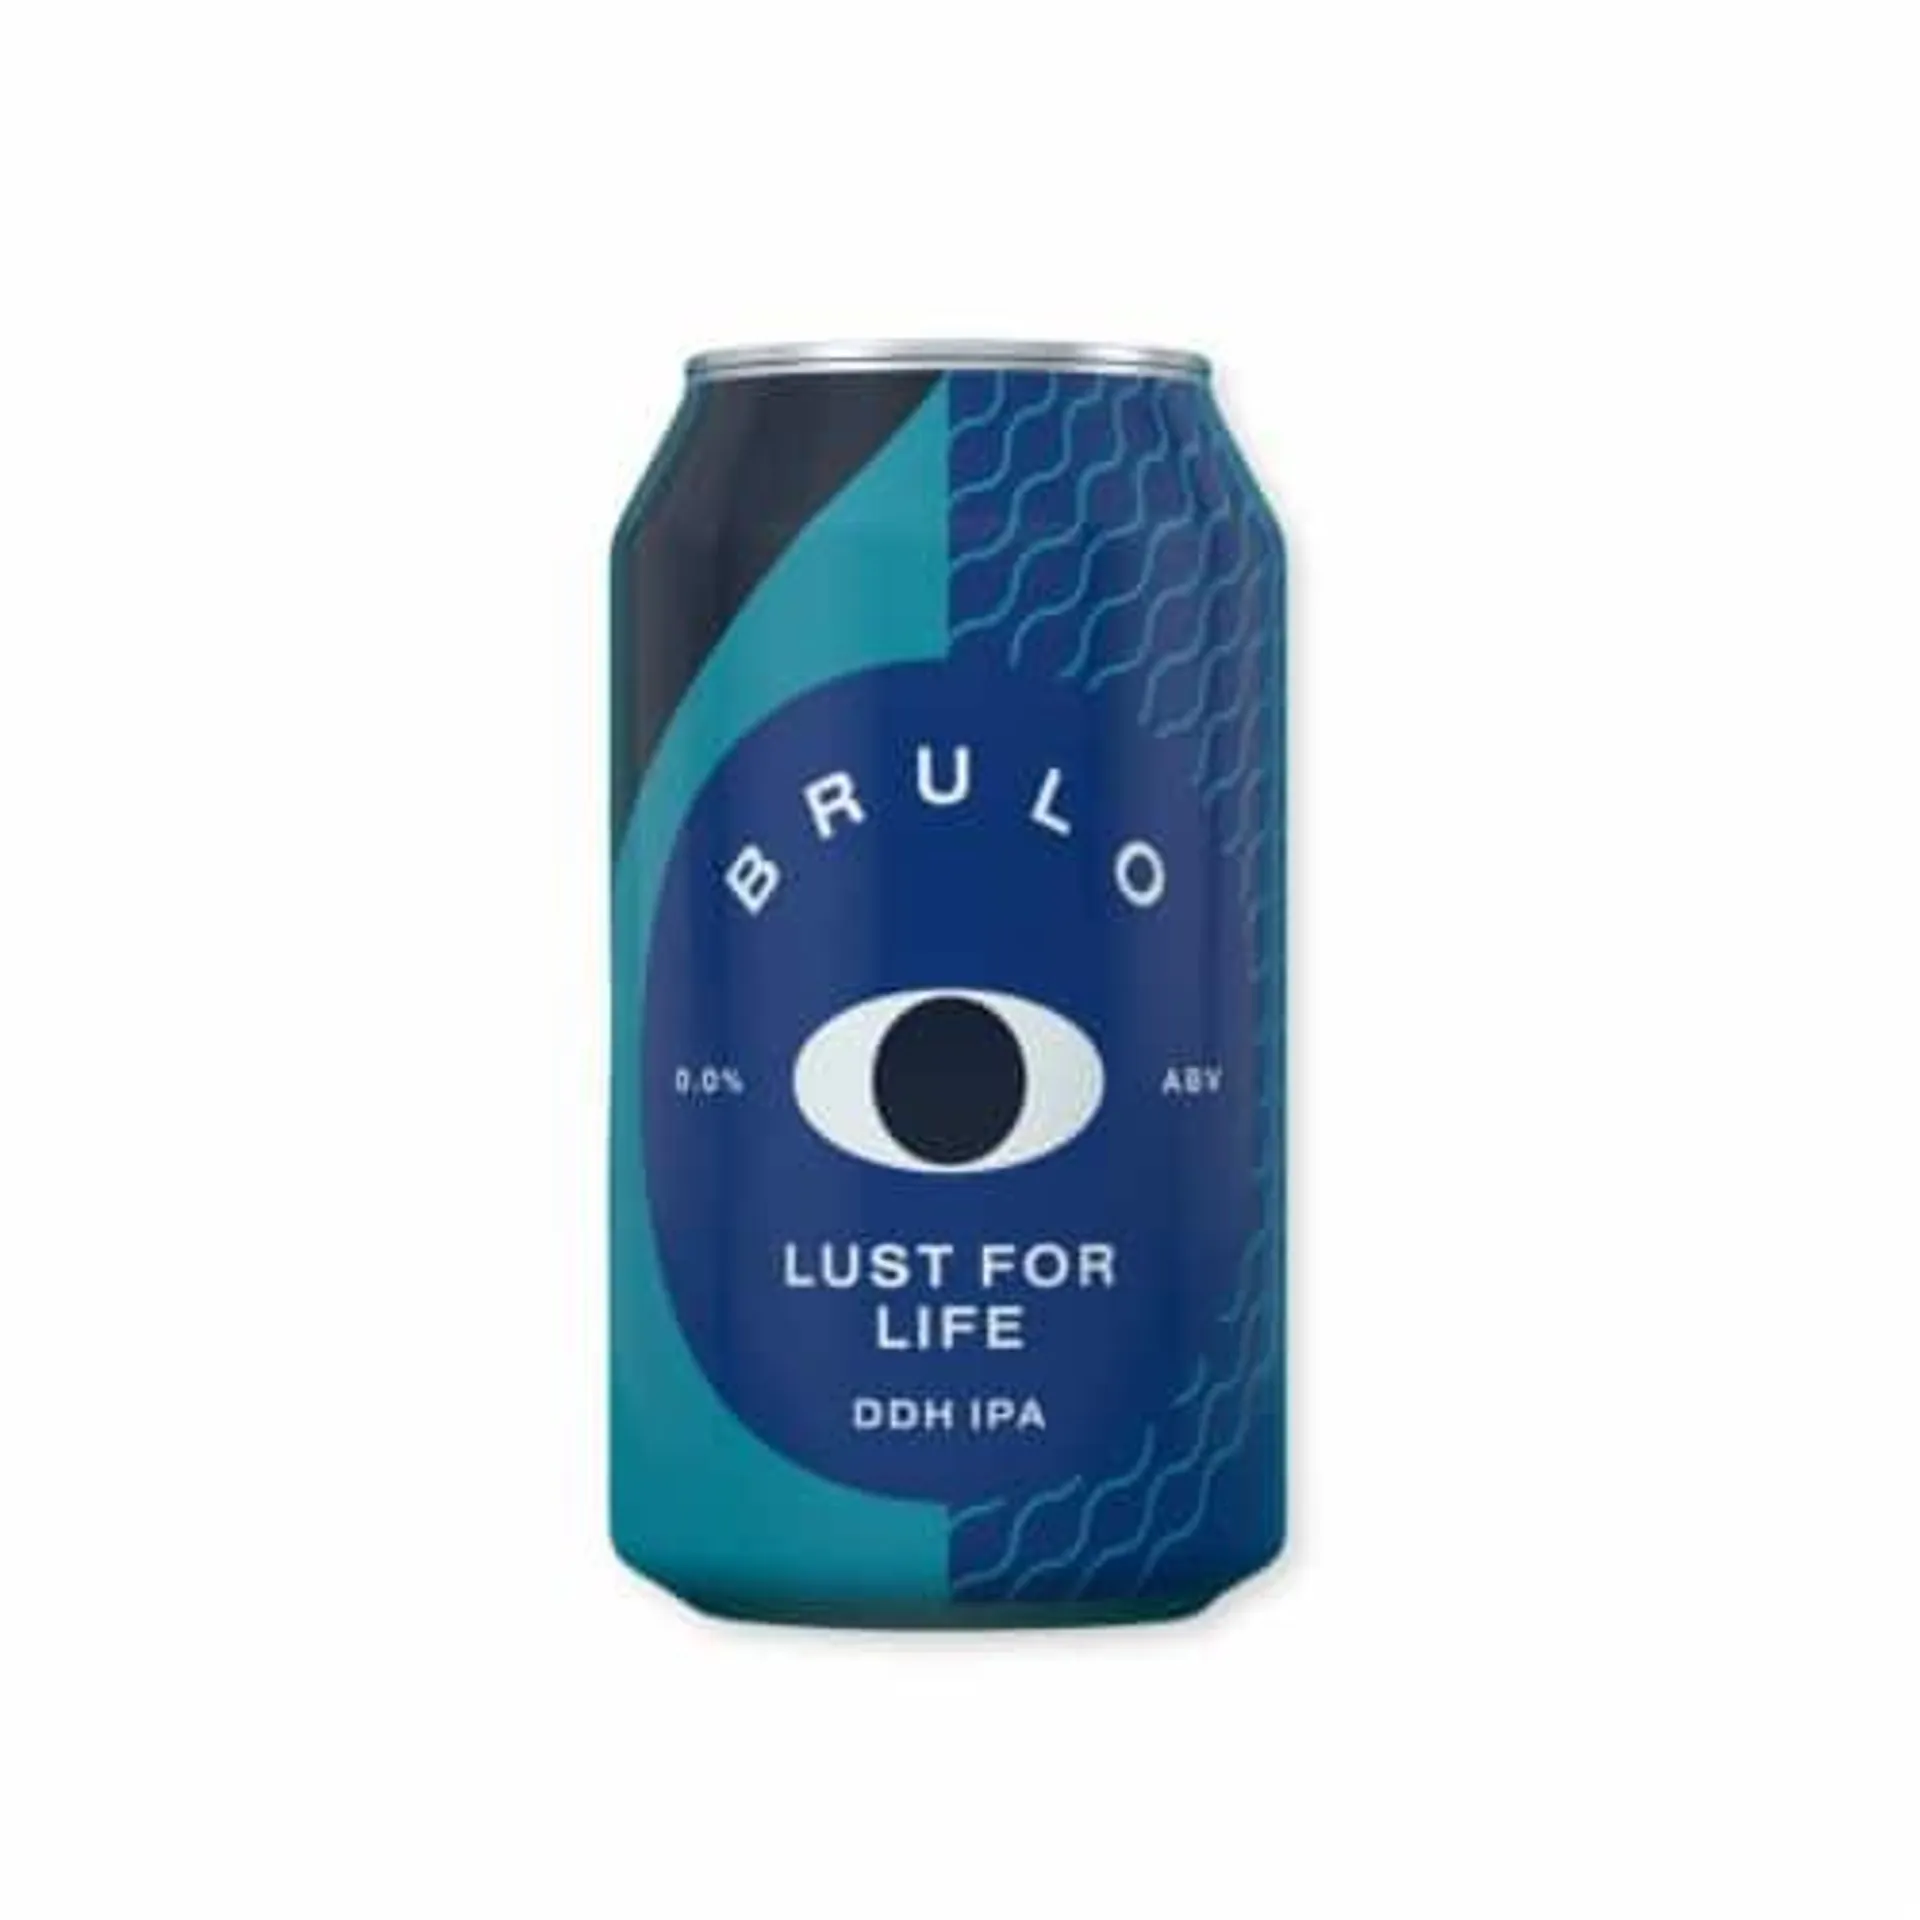 BRULO- Lust For Life DDH IPA, Non-Alcoholic, Alcohol-Free Beer, Low Calorie, Vegan 330mL each